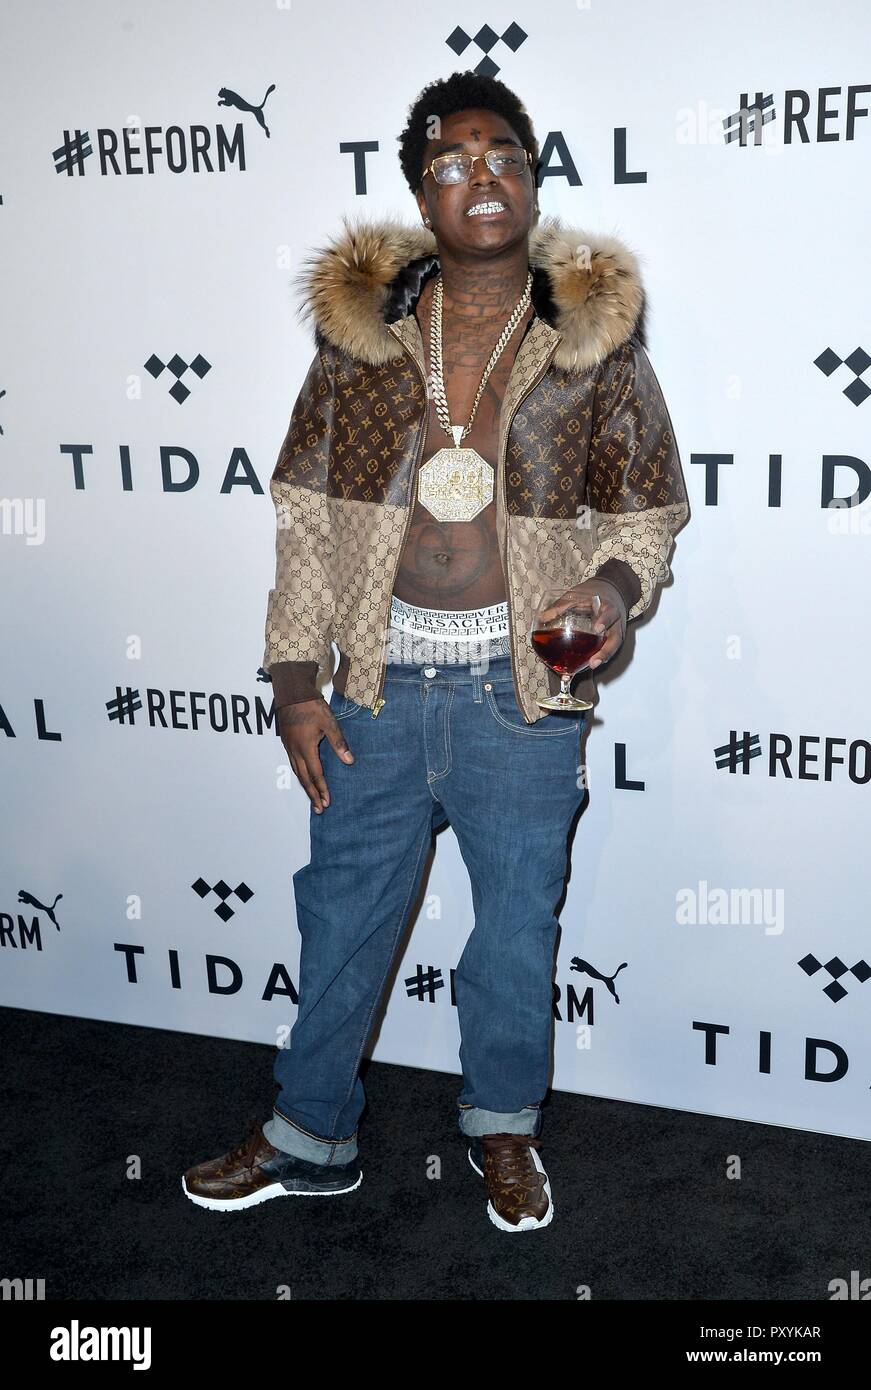 Kodak Black Outfit from October 31, 2021